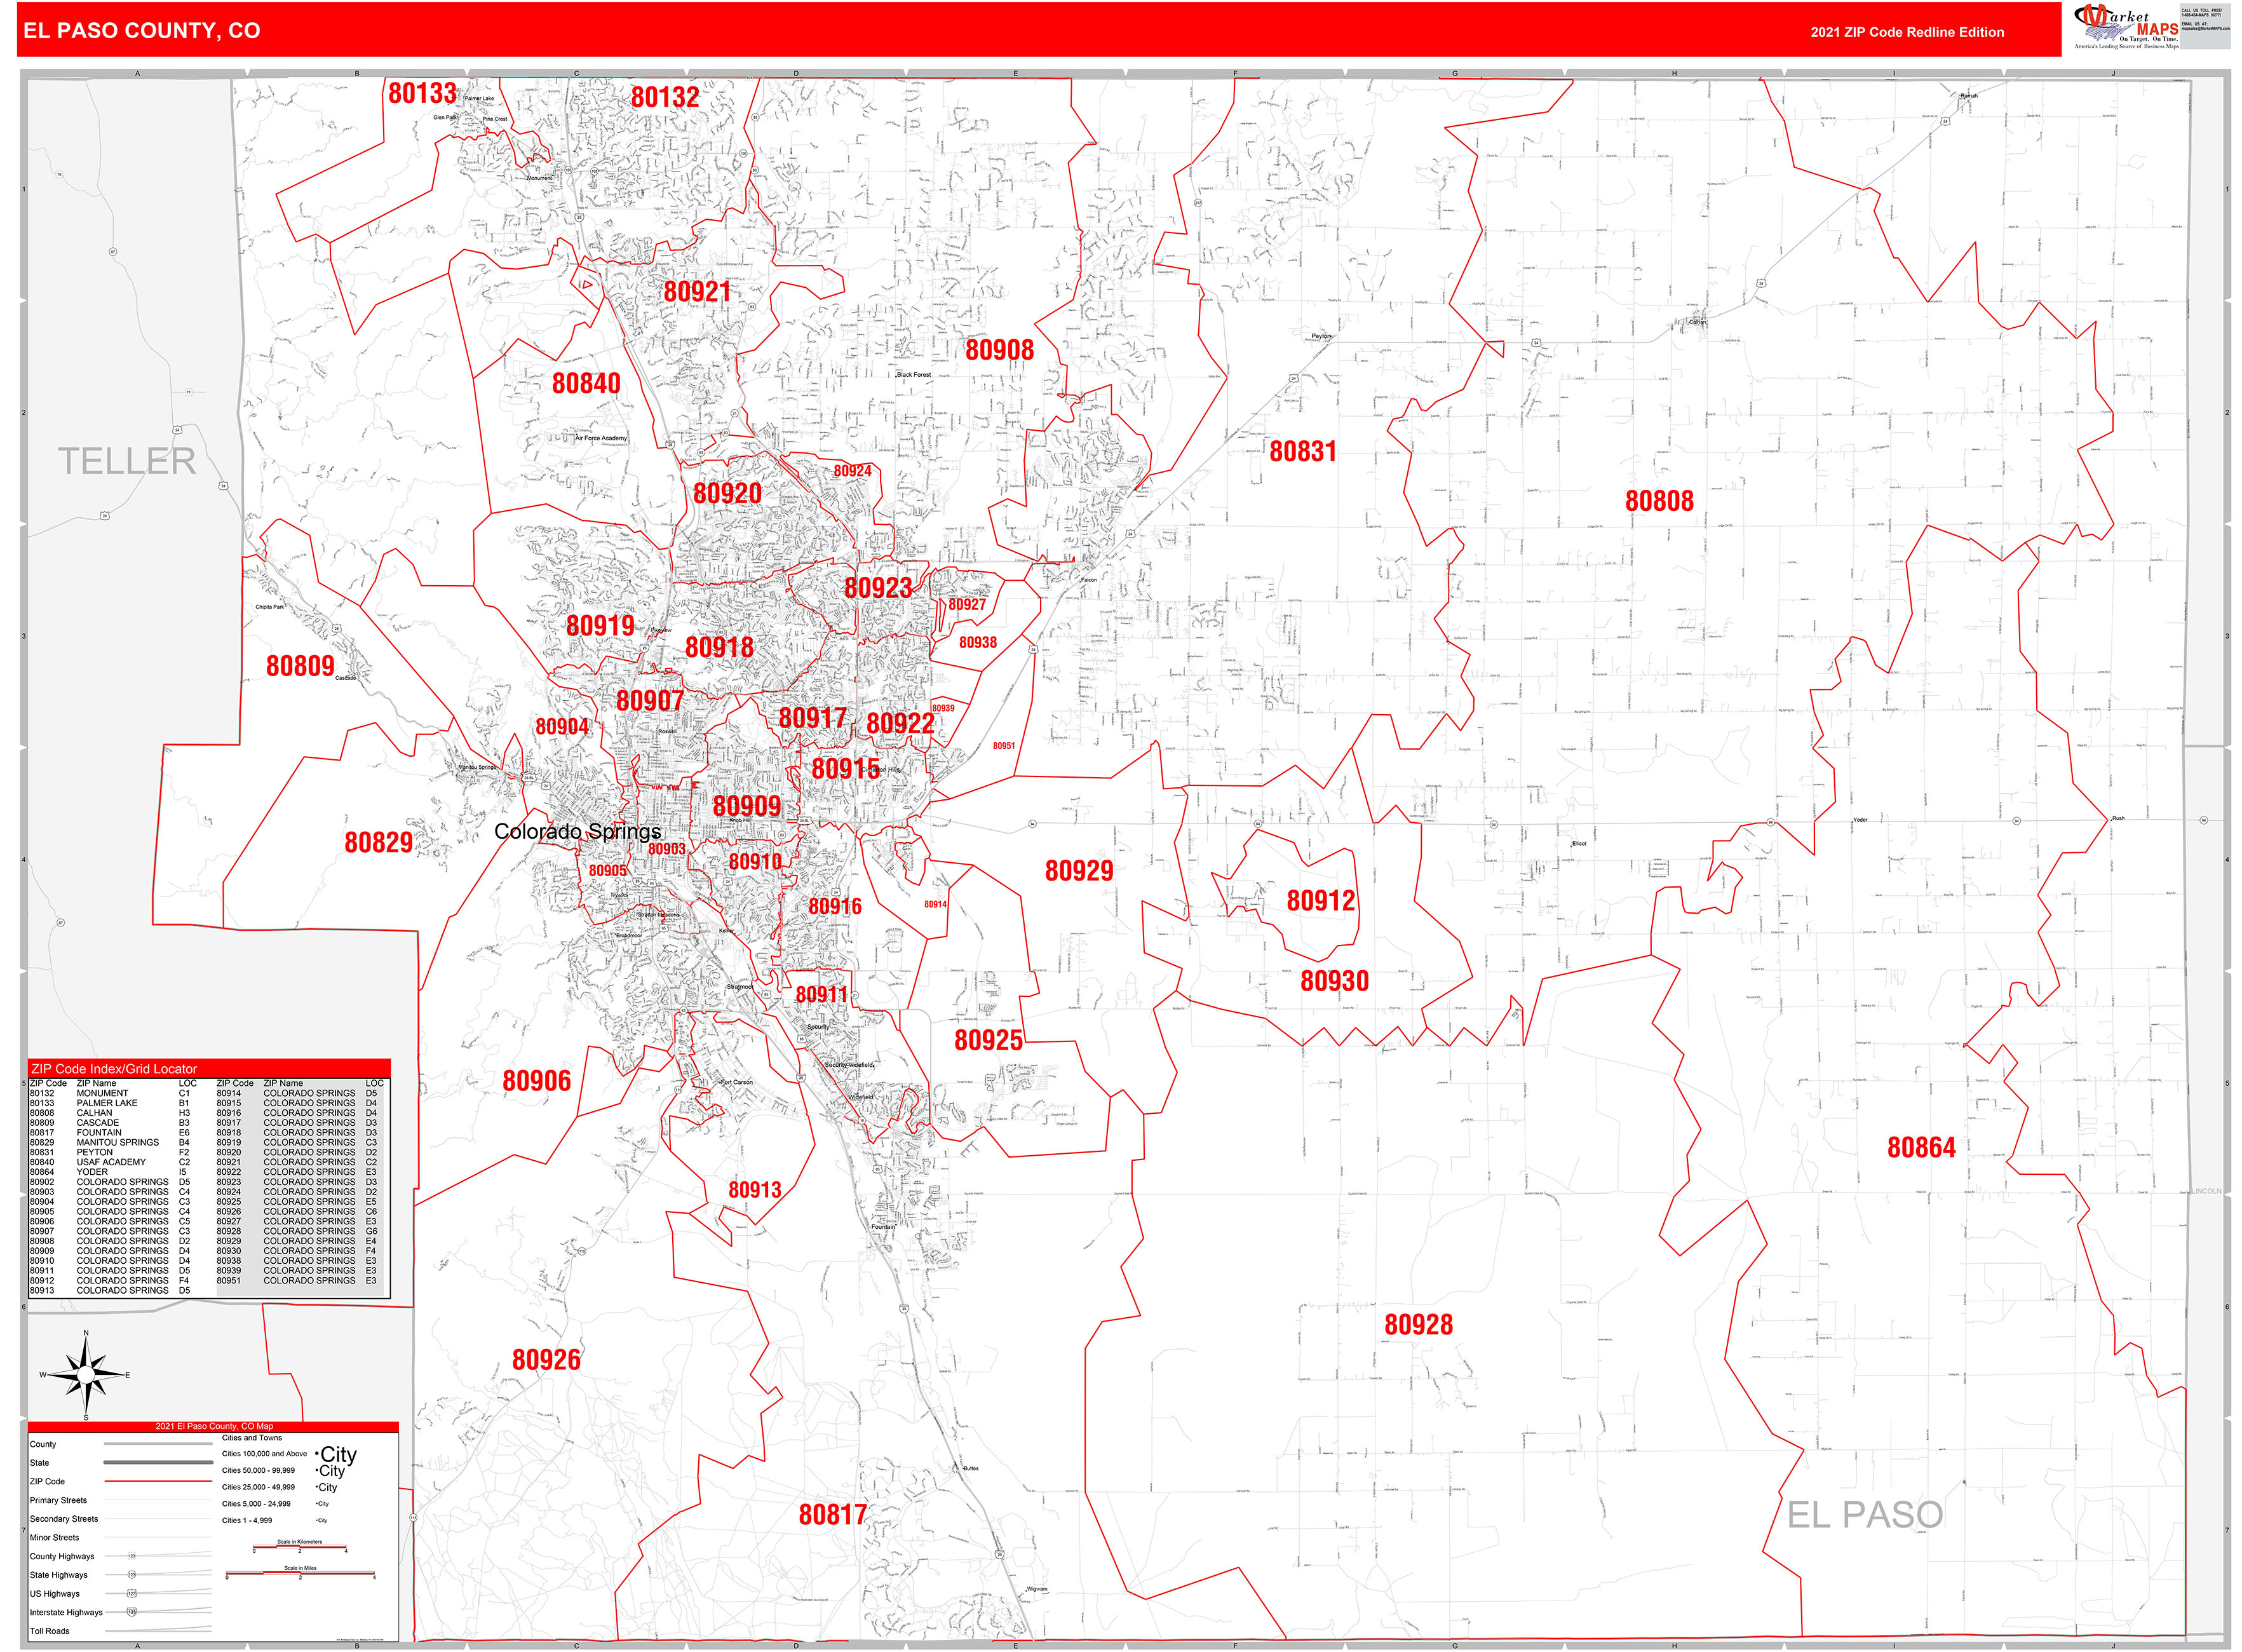 El Paso County Co Zip Code Wall Map Red Line Style By Marketmaps Mapsales 7477